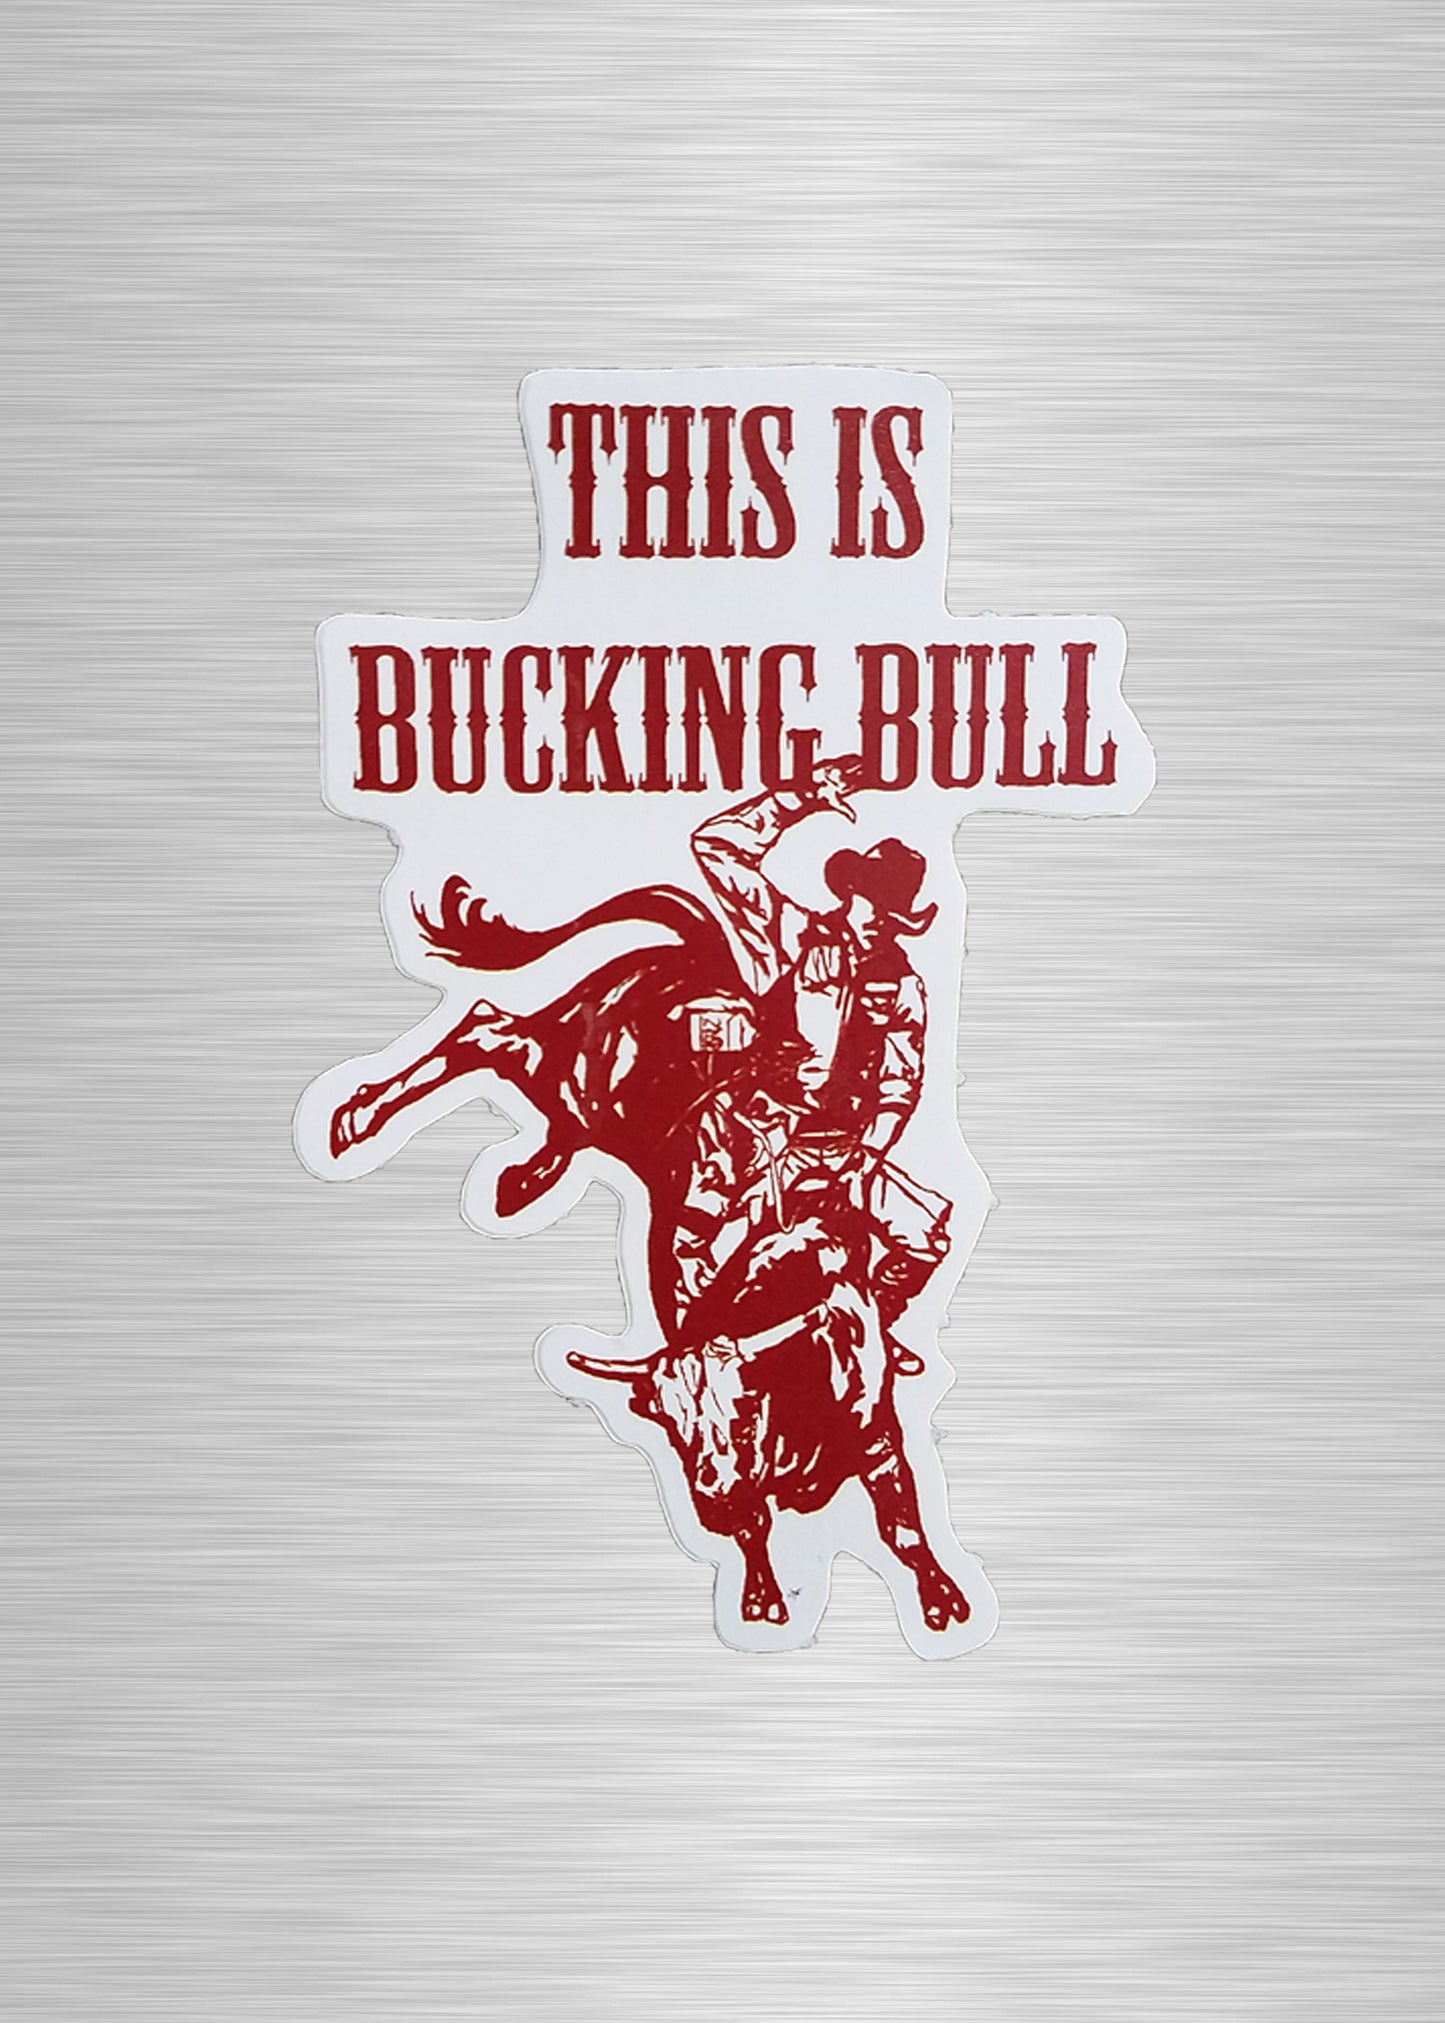 This is Bucking Bull Sticker/Decal